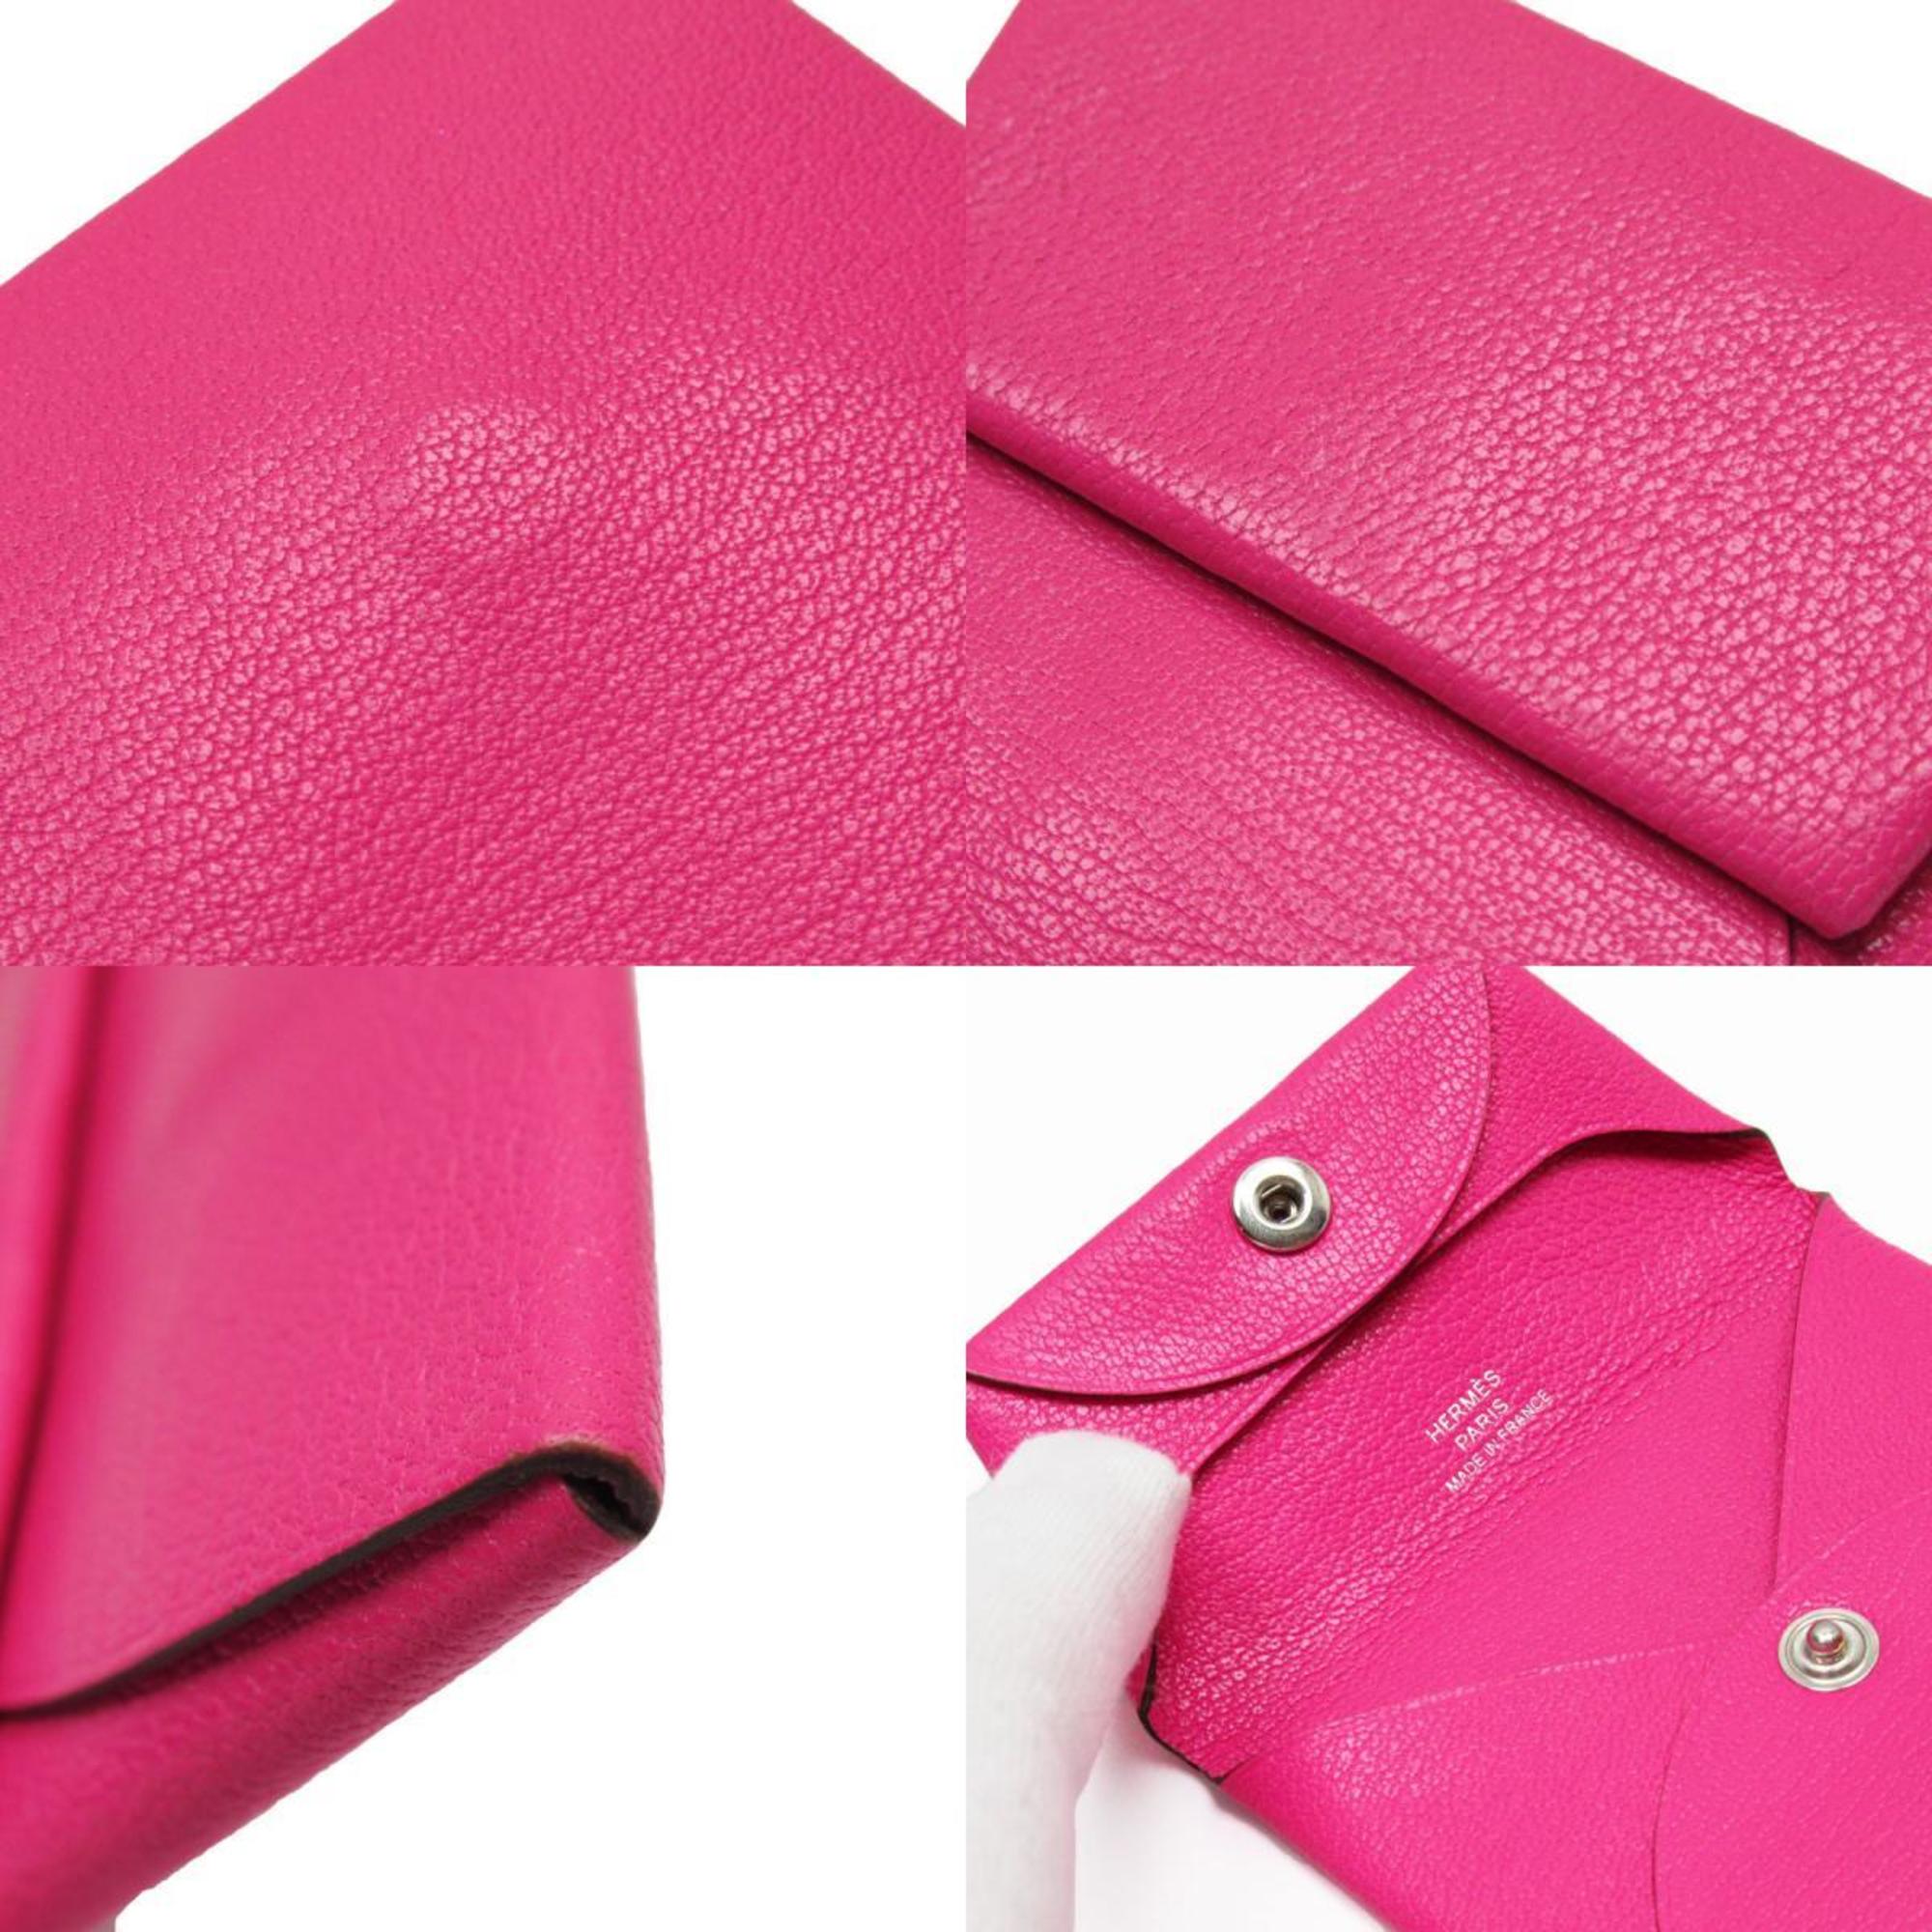 Hermes HERMES coin case wallet Bastia leather pink ladies w0222i